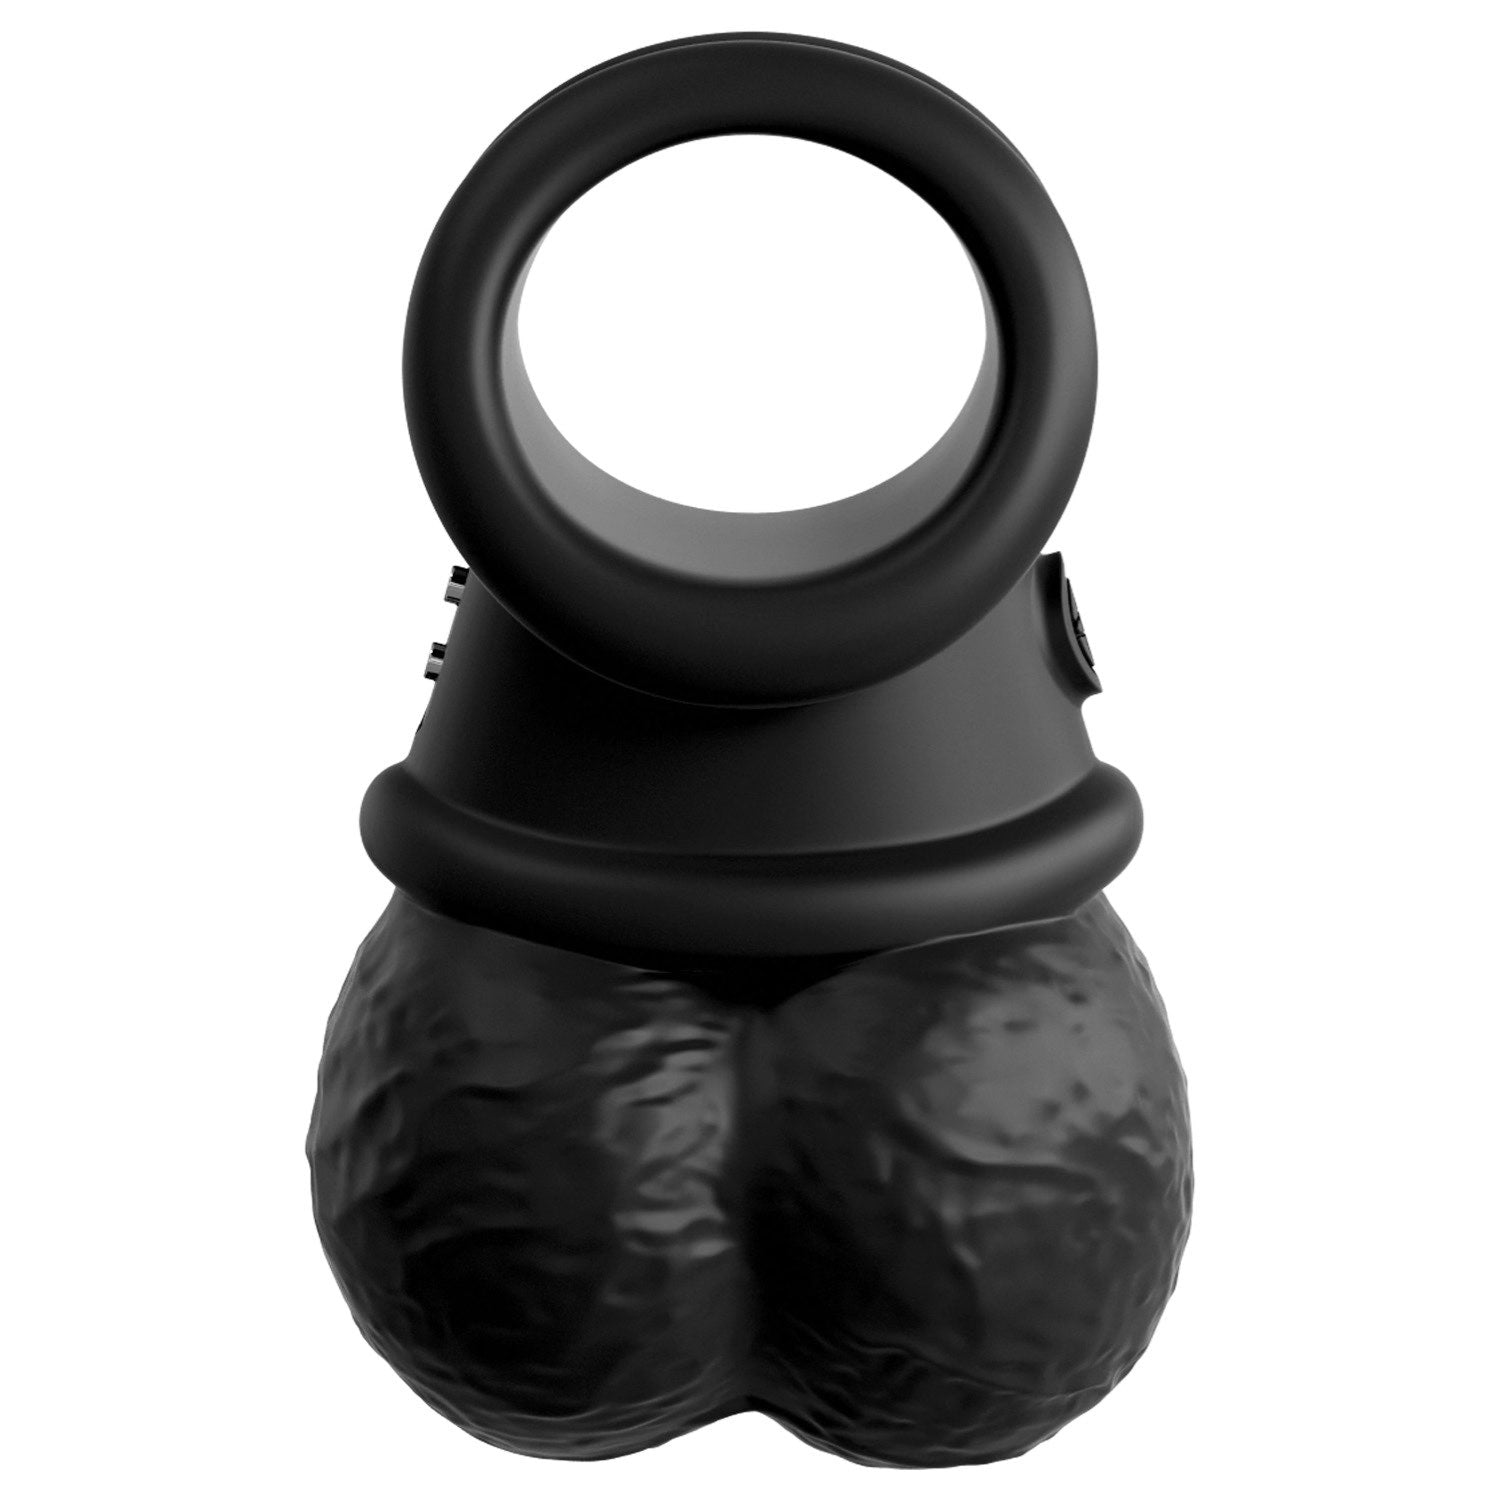 King Cock Elite The Crown Jewels Vibrating Silicone Balls - Black USB Rechargeable Vibrating Cock Ring by Pipedream